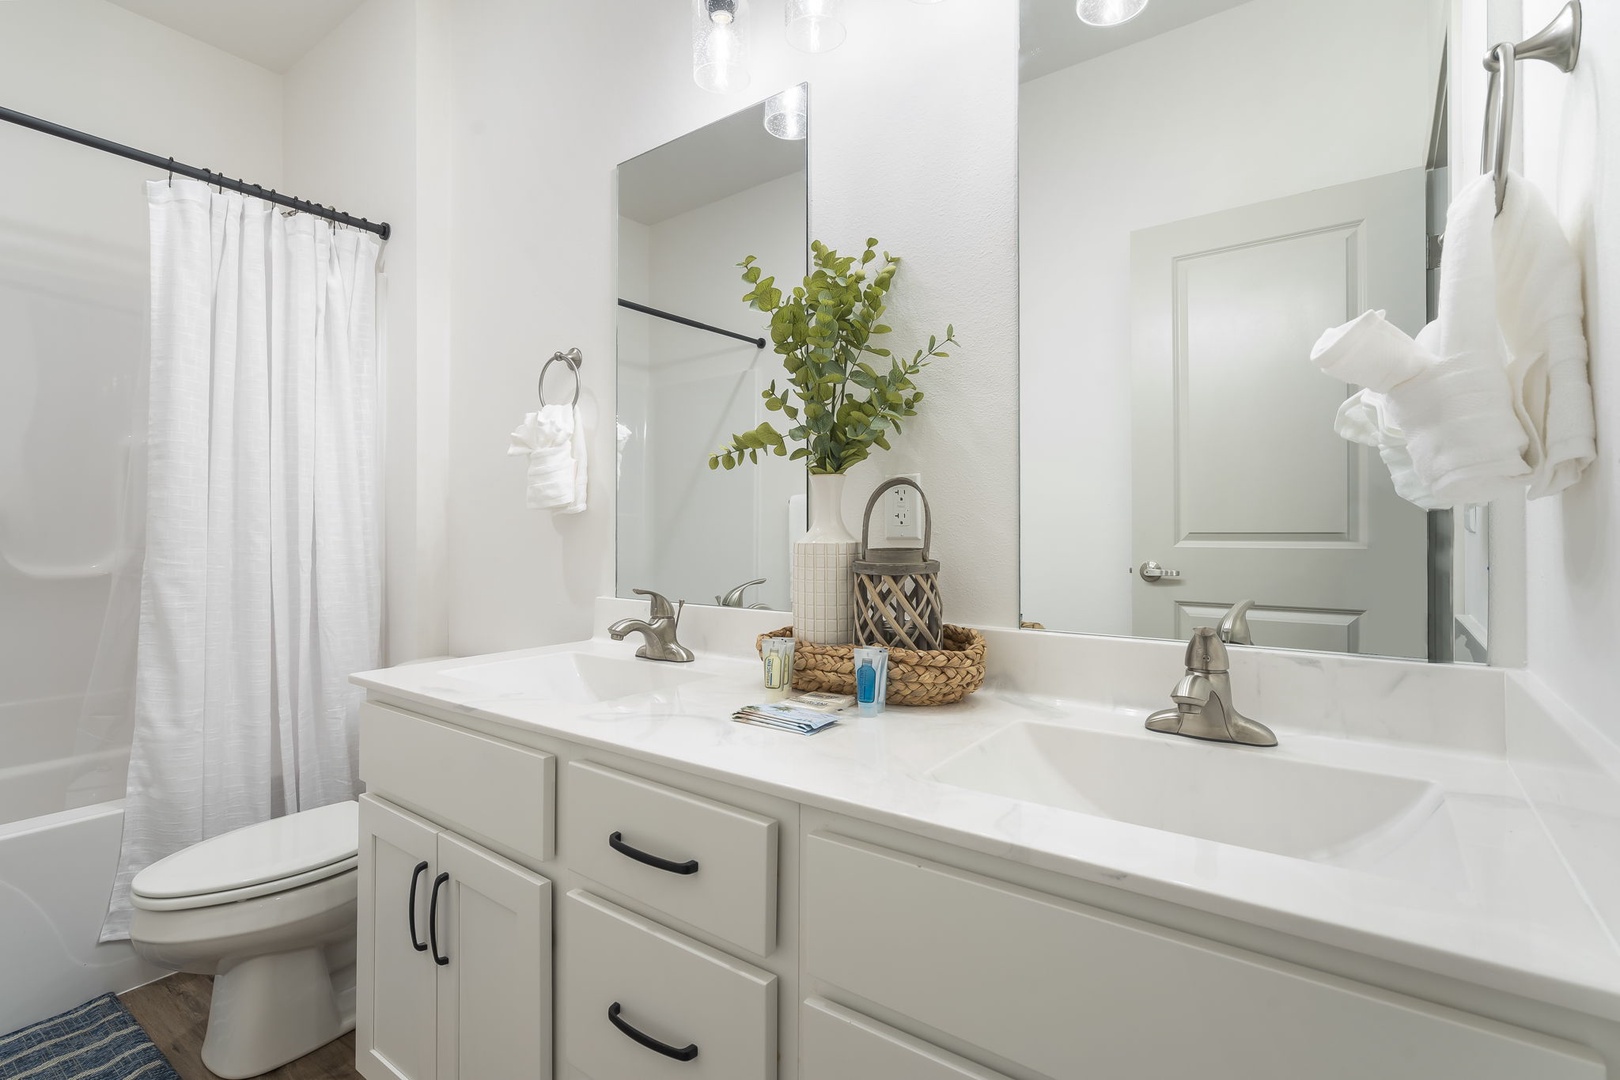 The shared bathroom offers a large double vanity and shower/tub combo